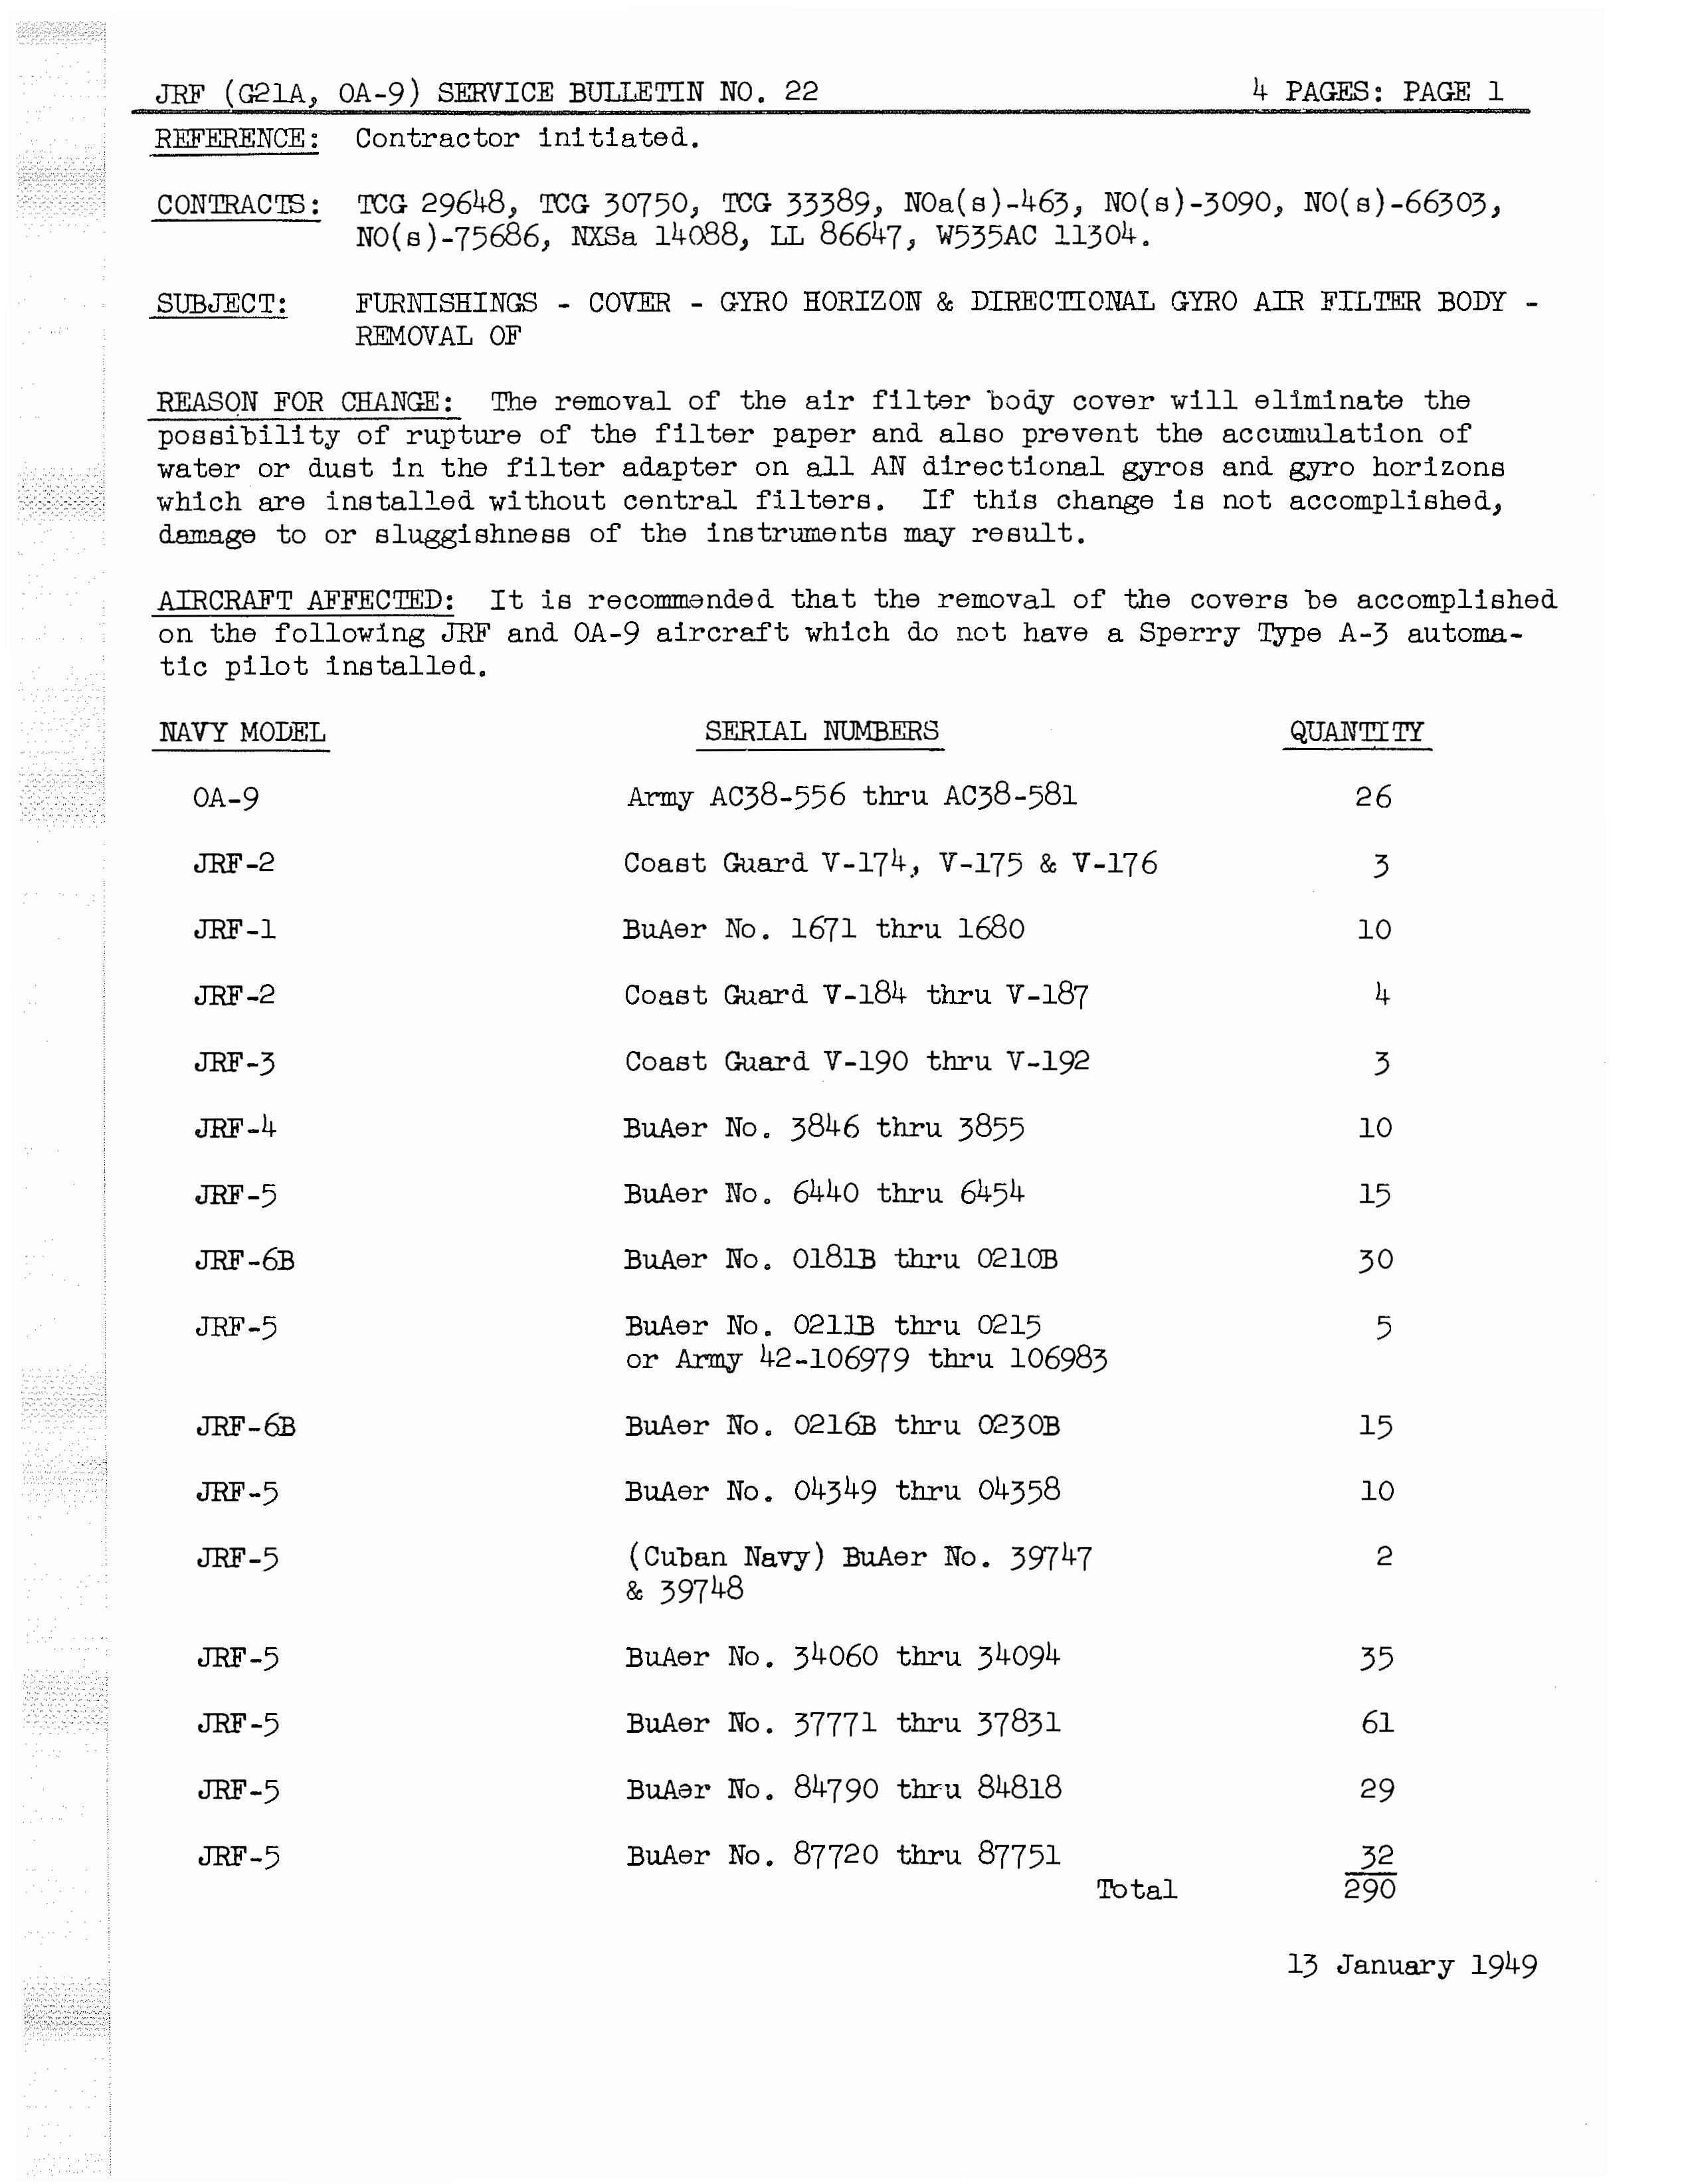 Sample page 3 from AirCorps Library document: Removal of Furnishings, Cover, Gyro Horizon Indicator and Directional Gyro Air Filter Body for JRF Aircraft